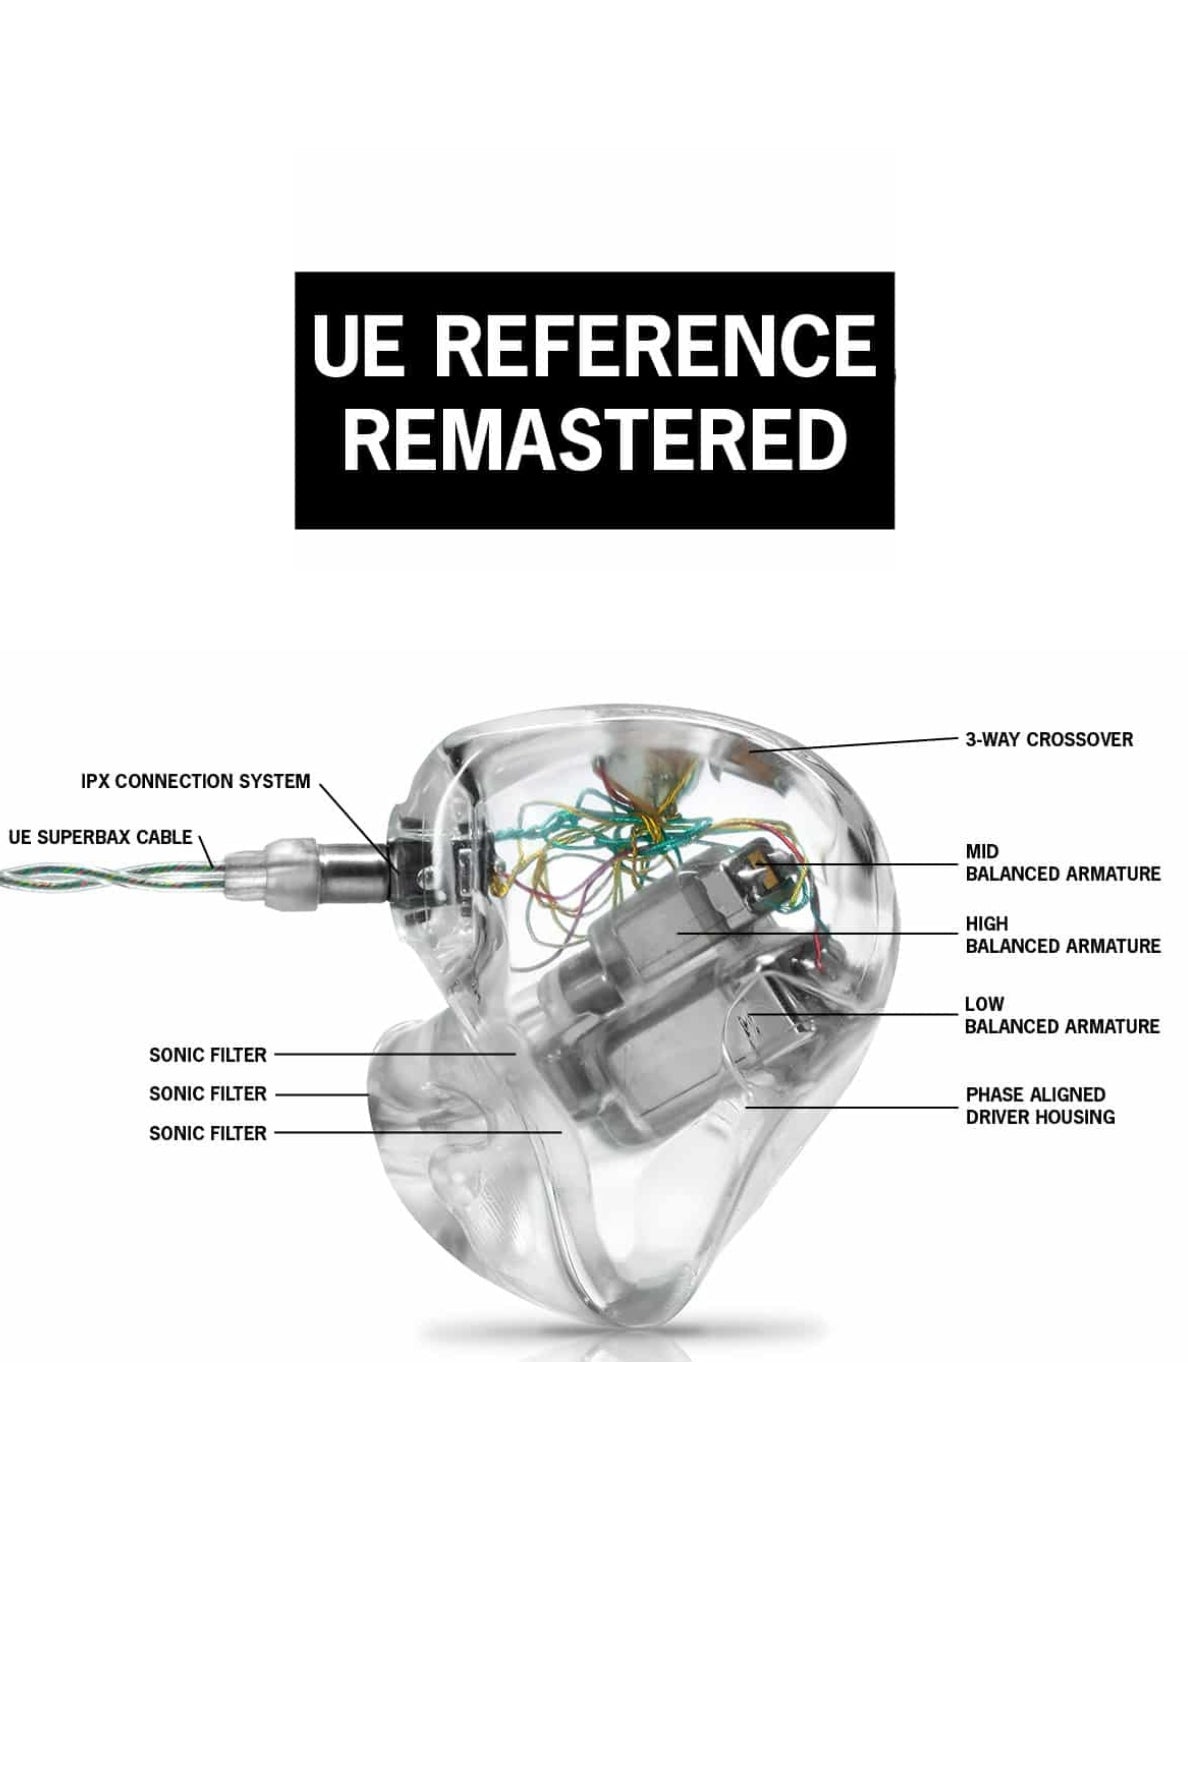 UE REFERENCE REMASTERED PERFORMANCE